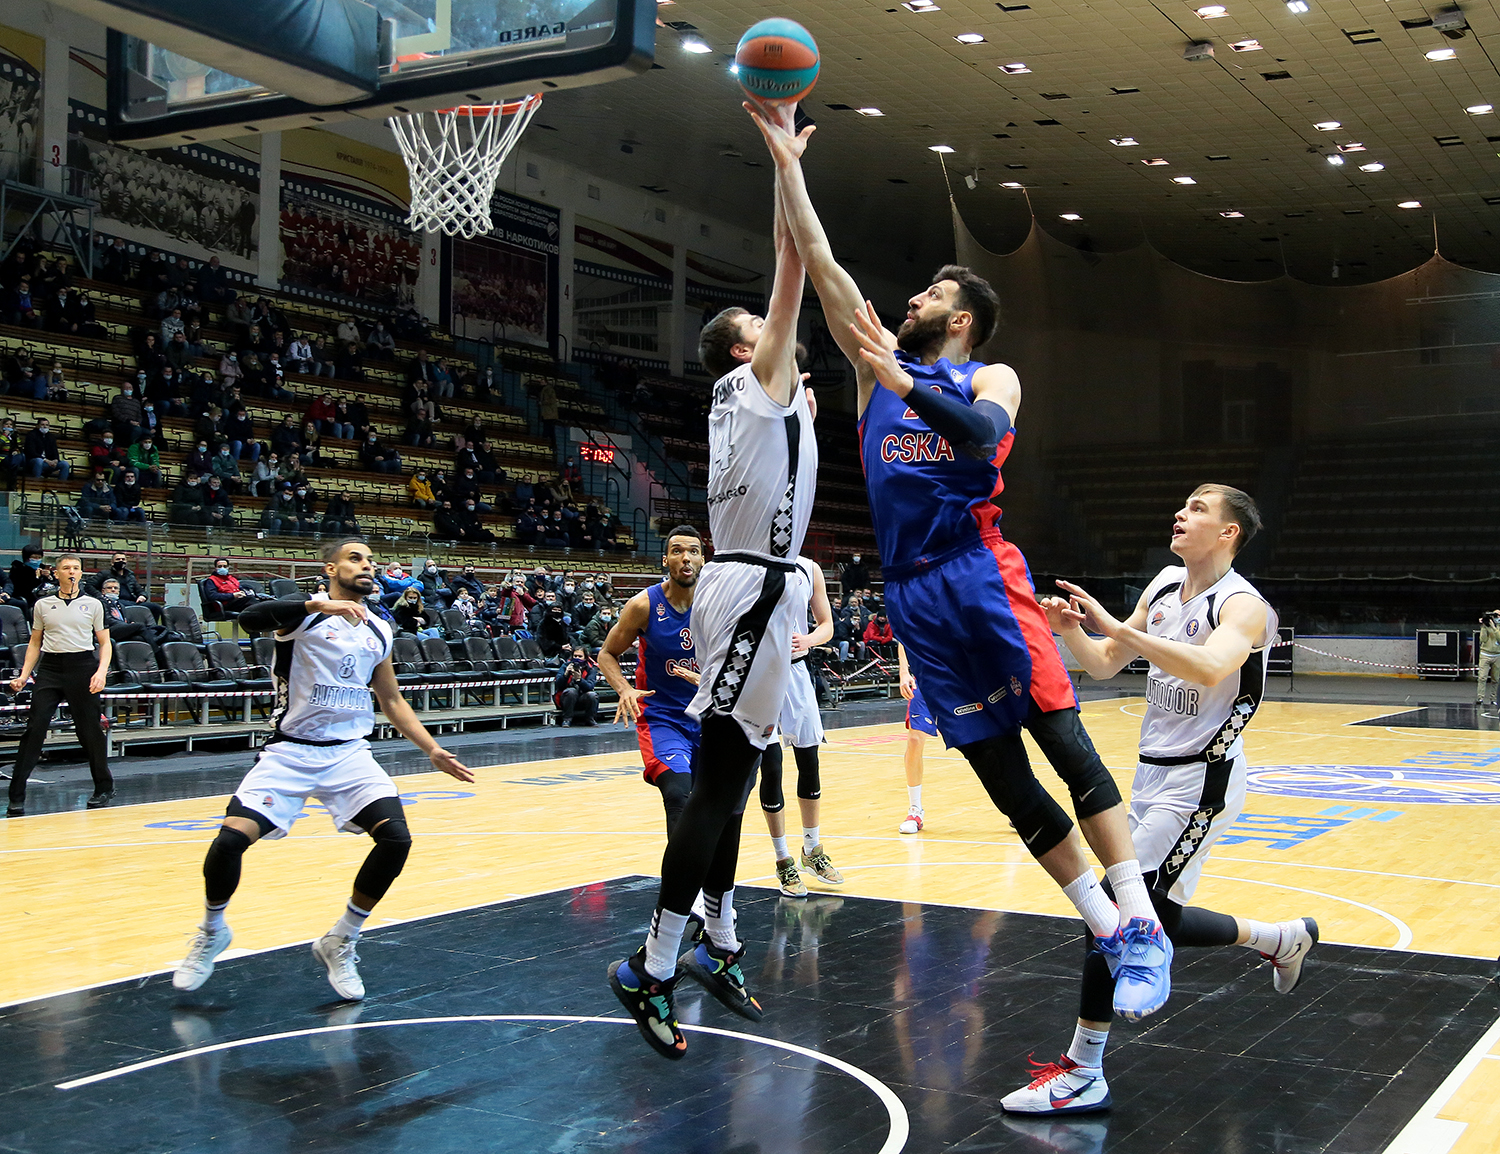 CSKA win in Saratov and continue to chase Zenit